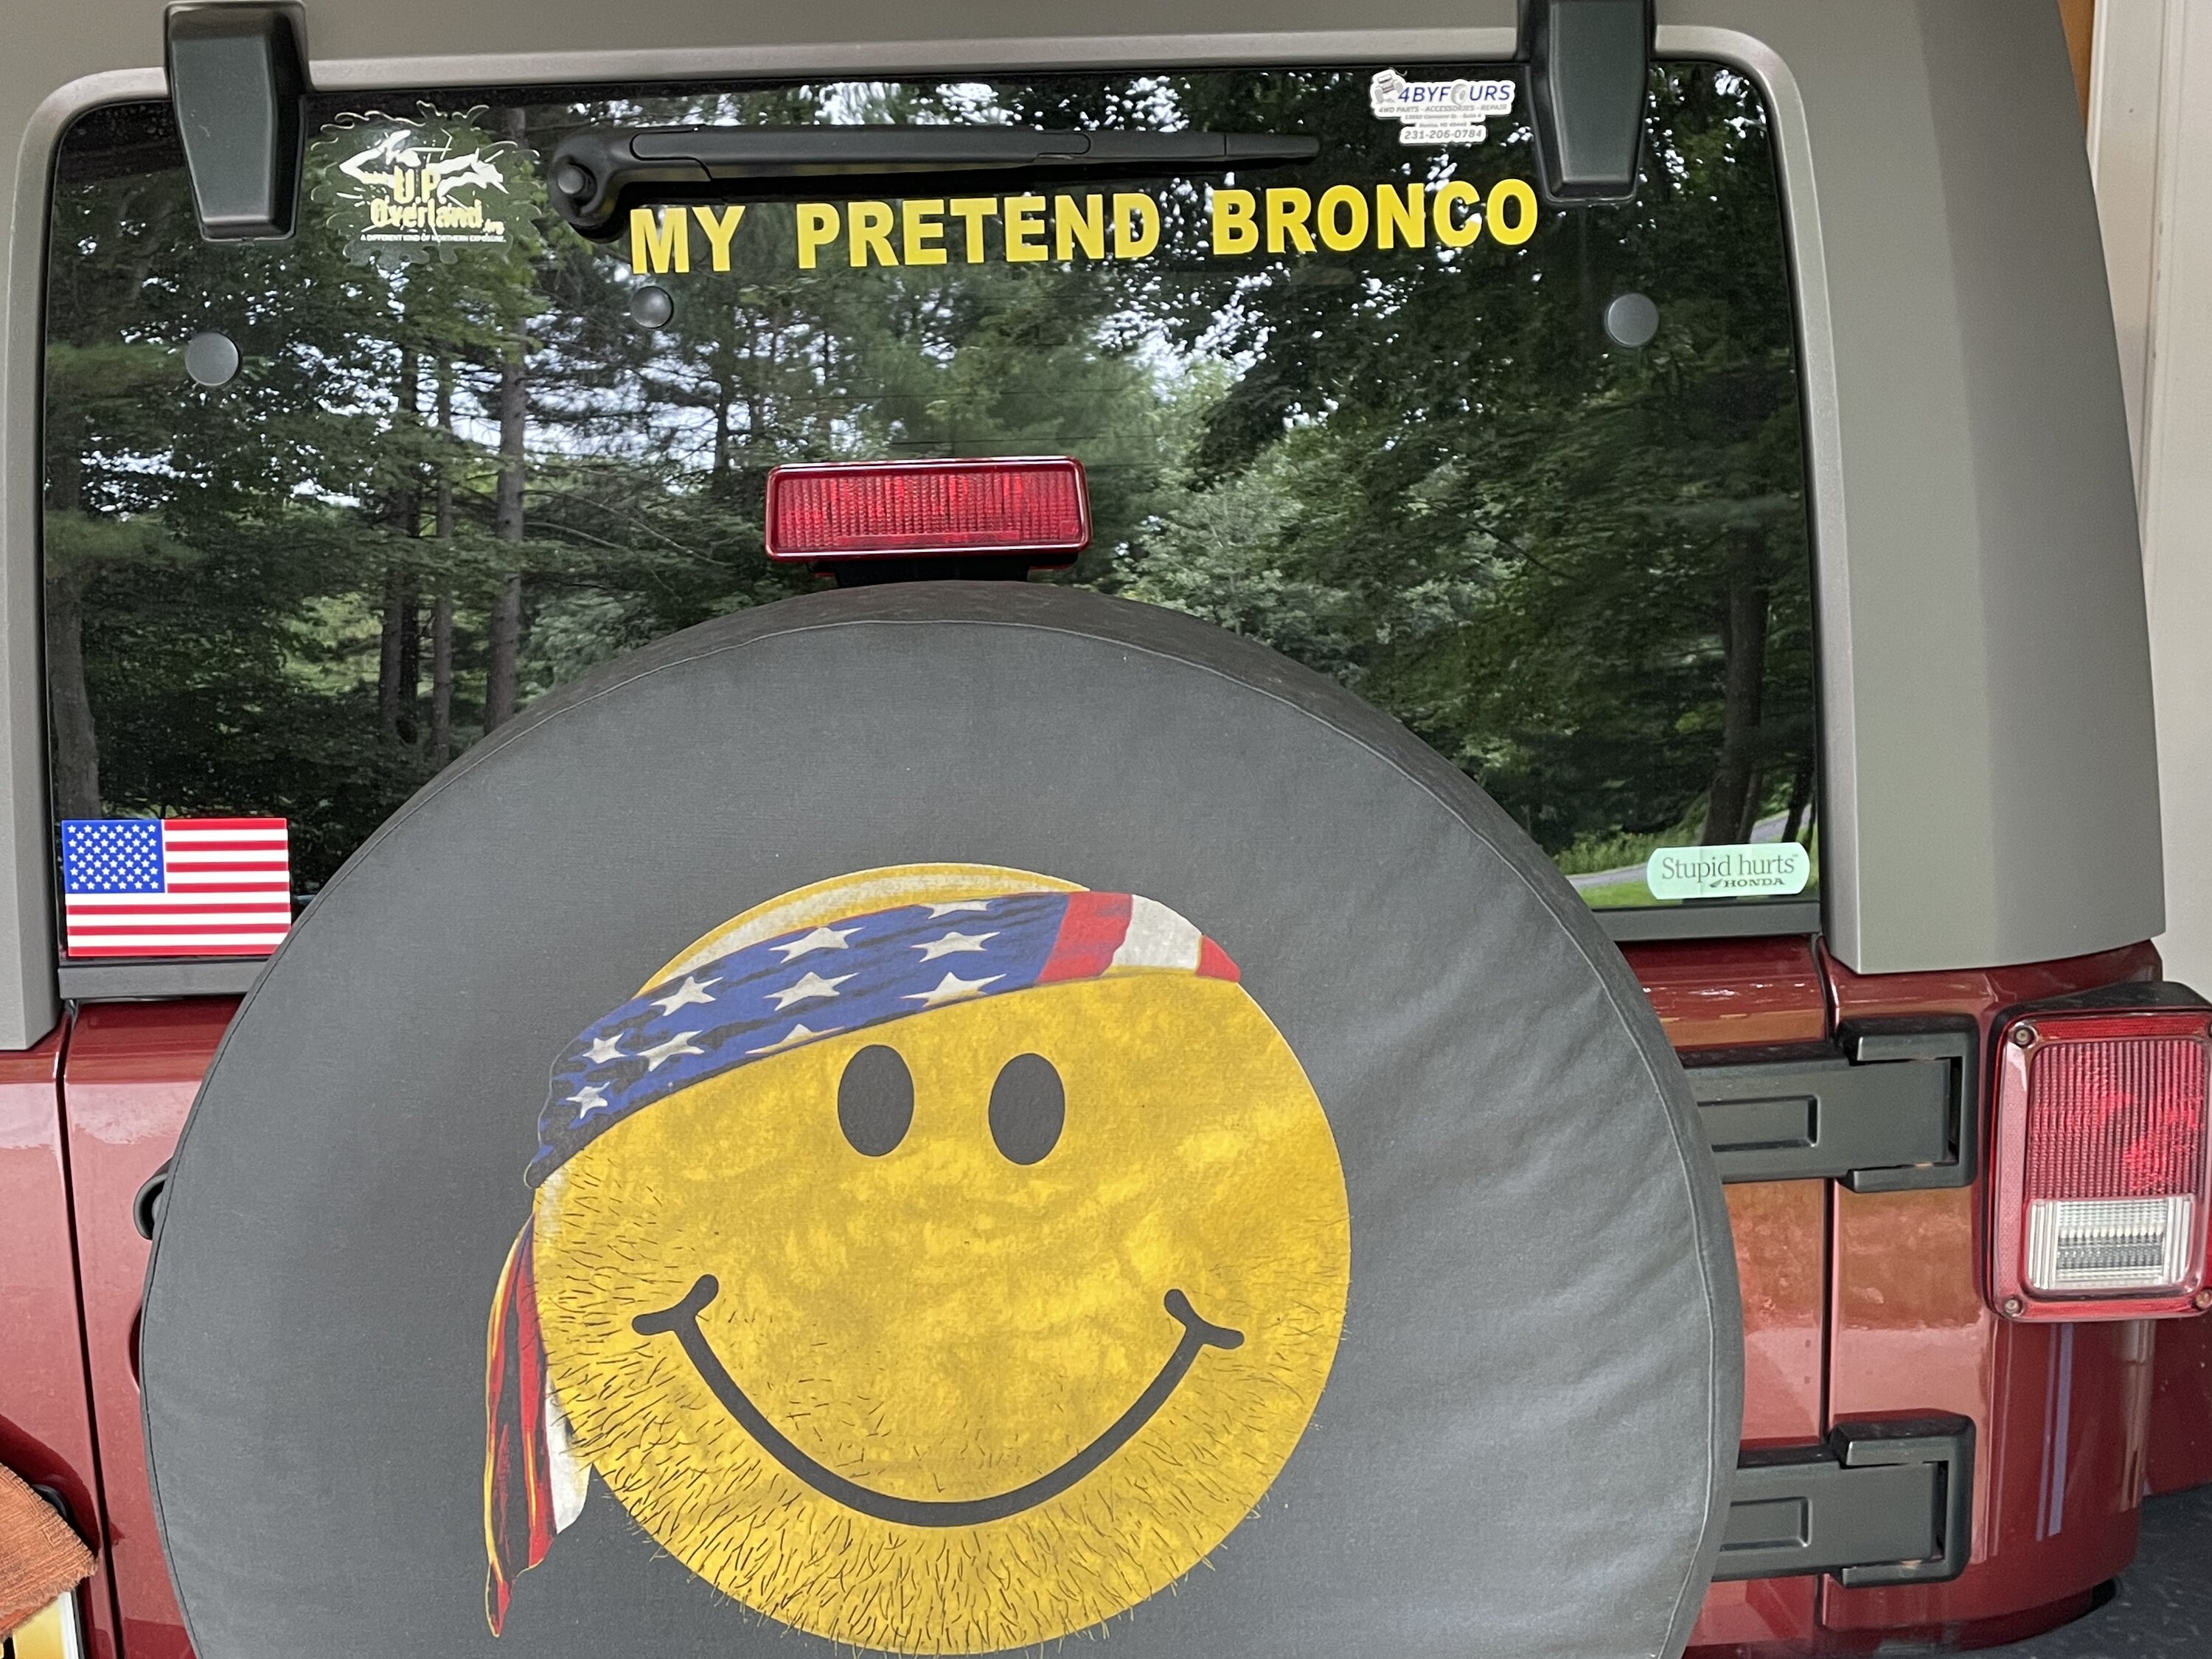 Ford Bronco Anyone Feel Like You're Already Driving Your New Bronco? My Pretend Bronco.JPG